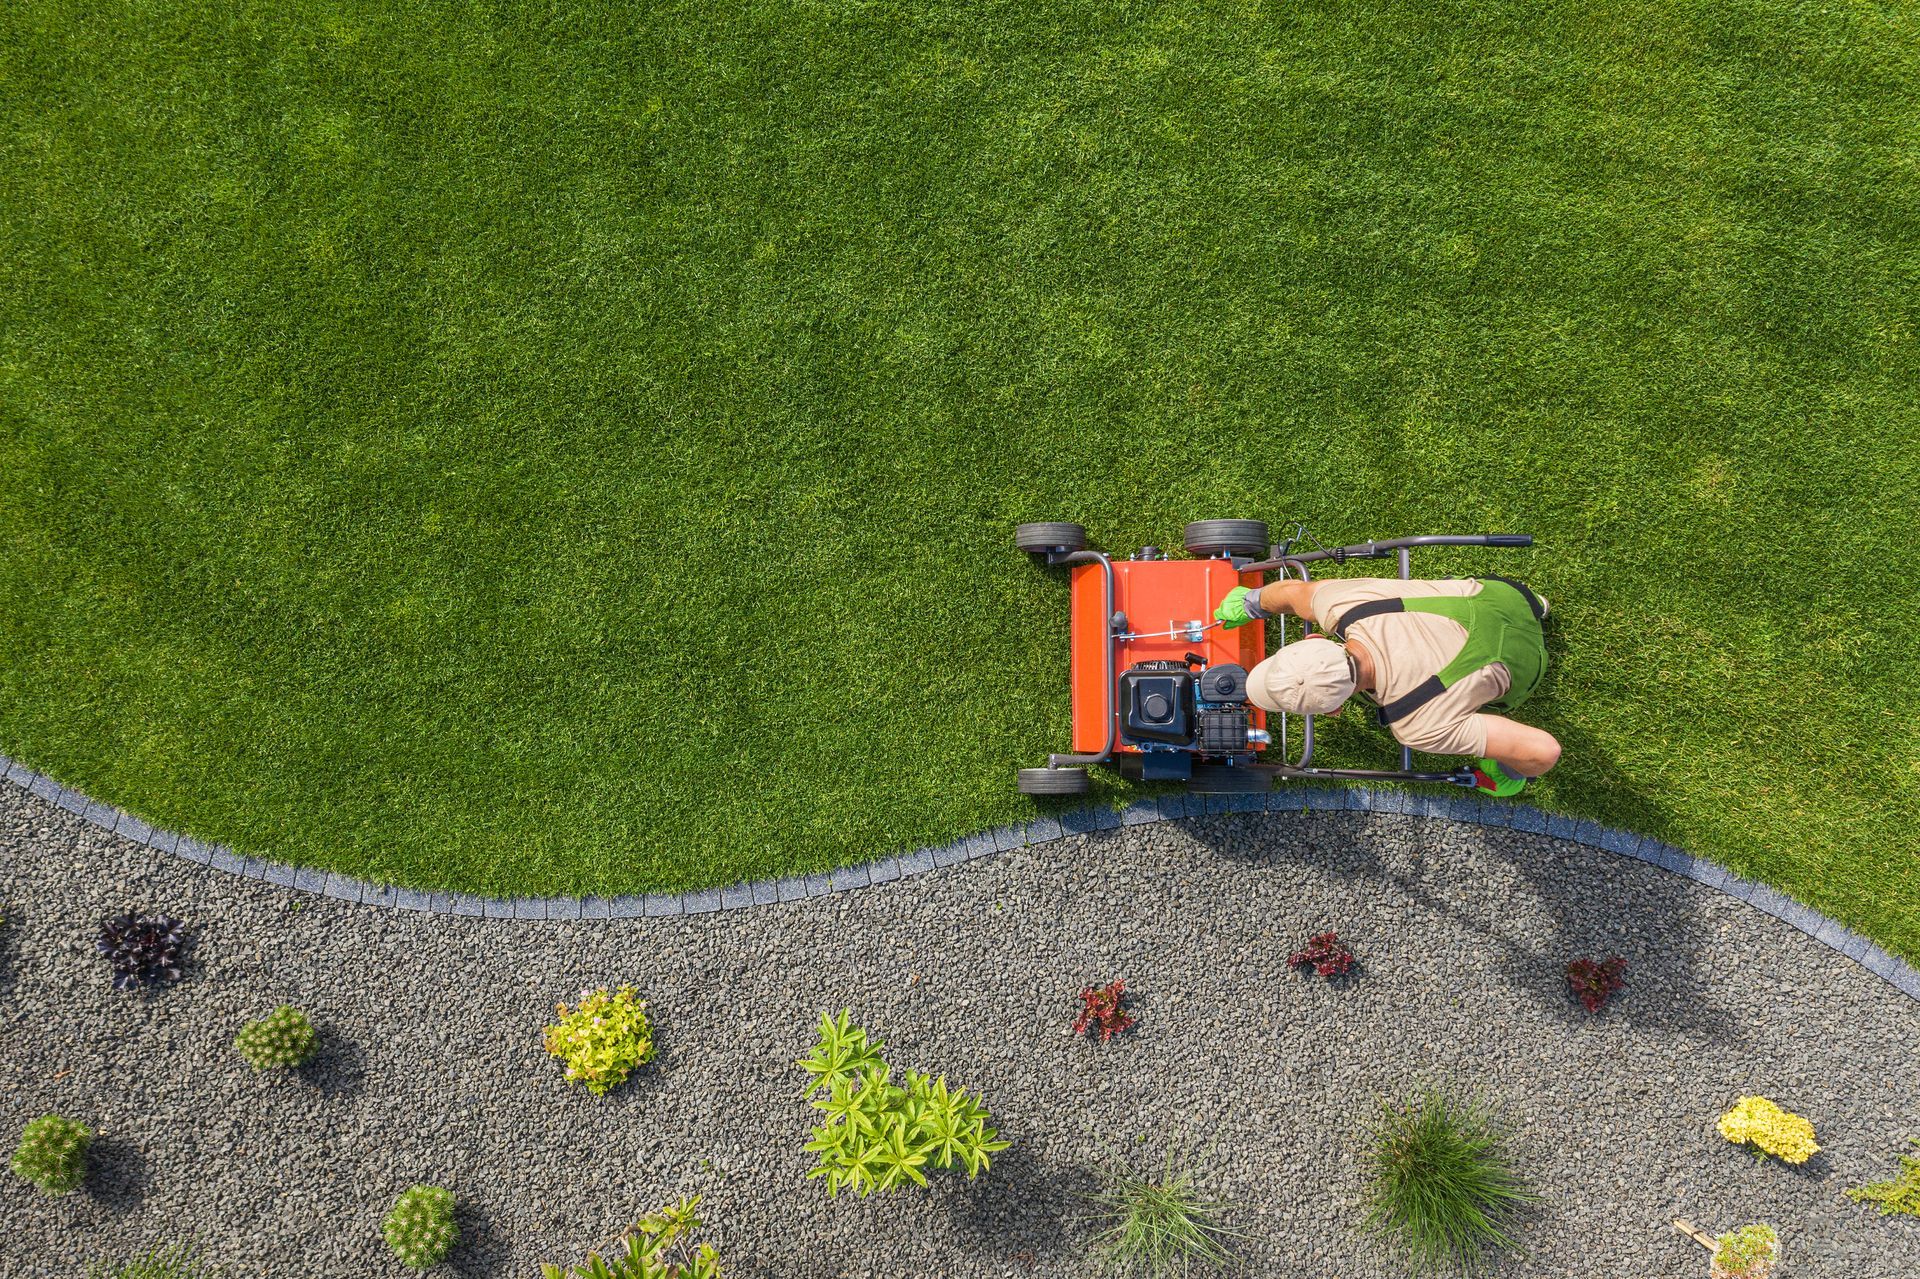 Powerful Gasoline Lawn Aerator Job For Controlling Lawn Thatch, And Reducing Soil Compaction